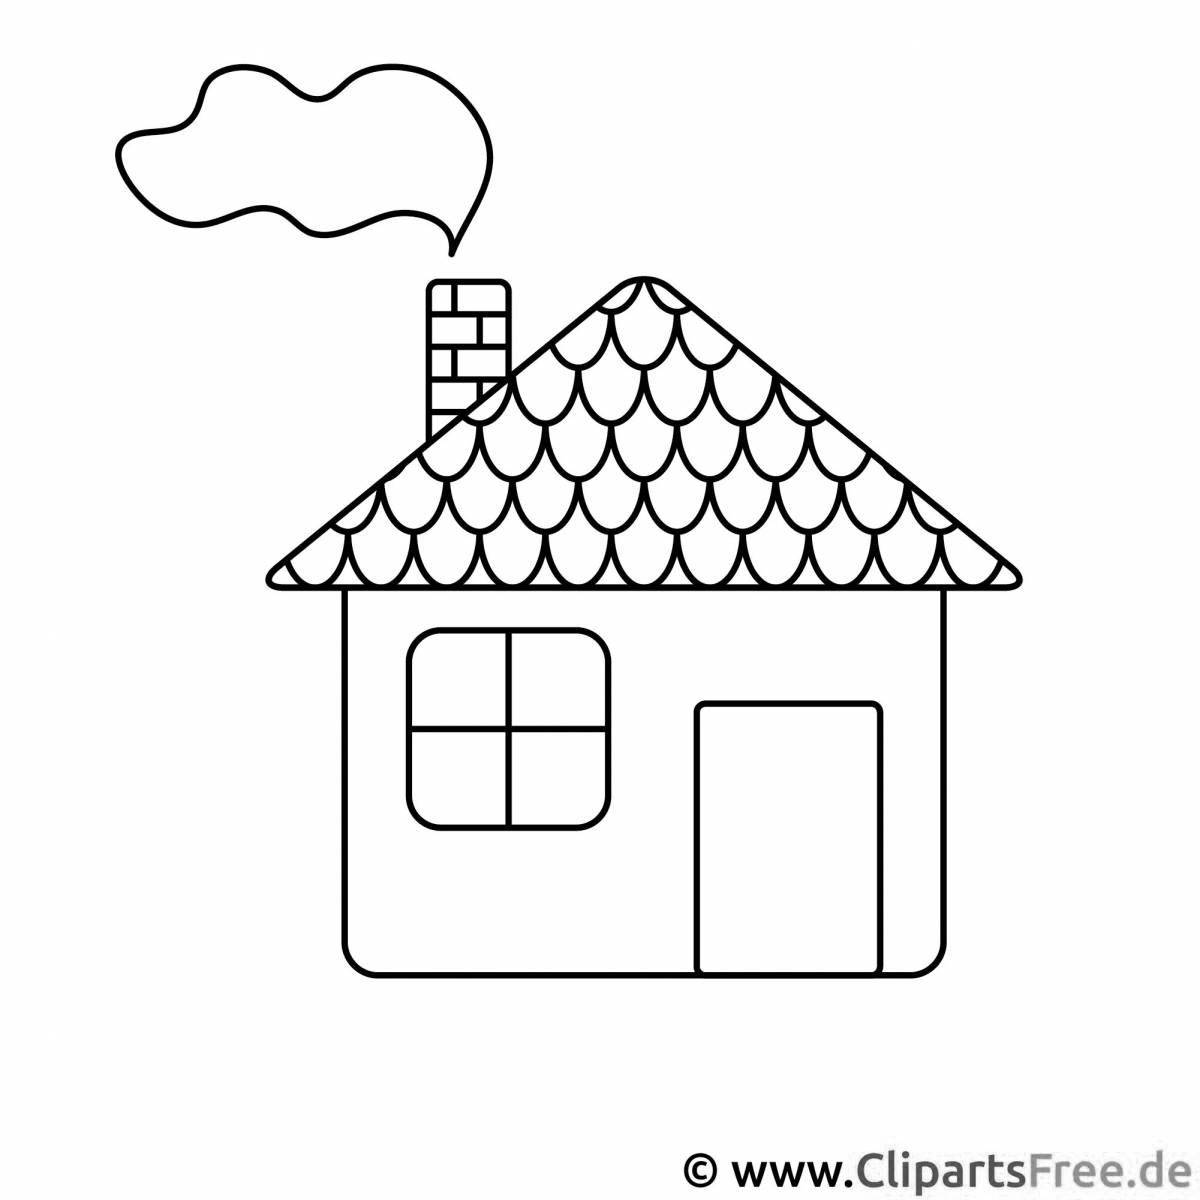 Coloring picture perfect house